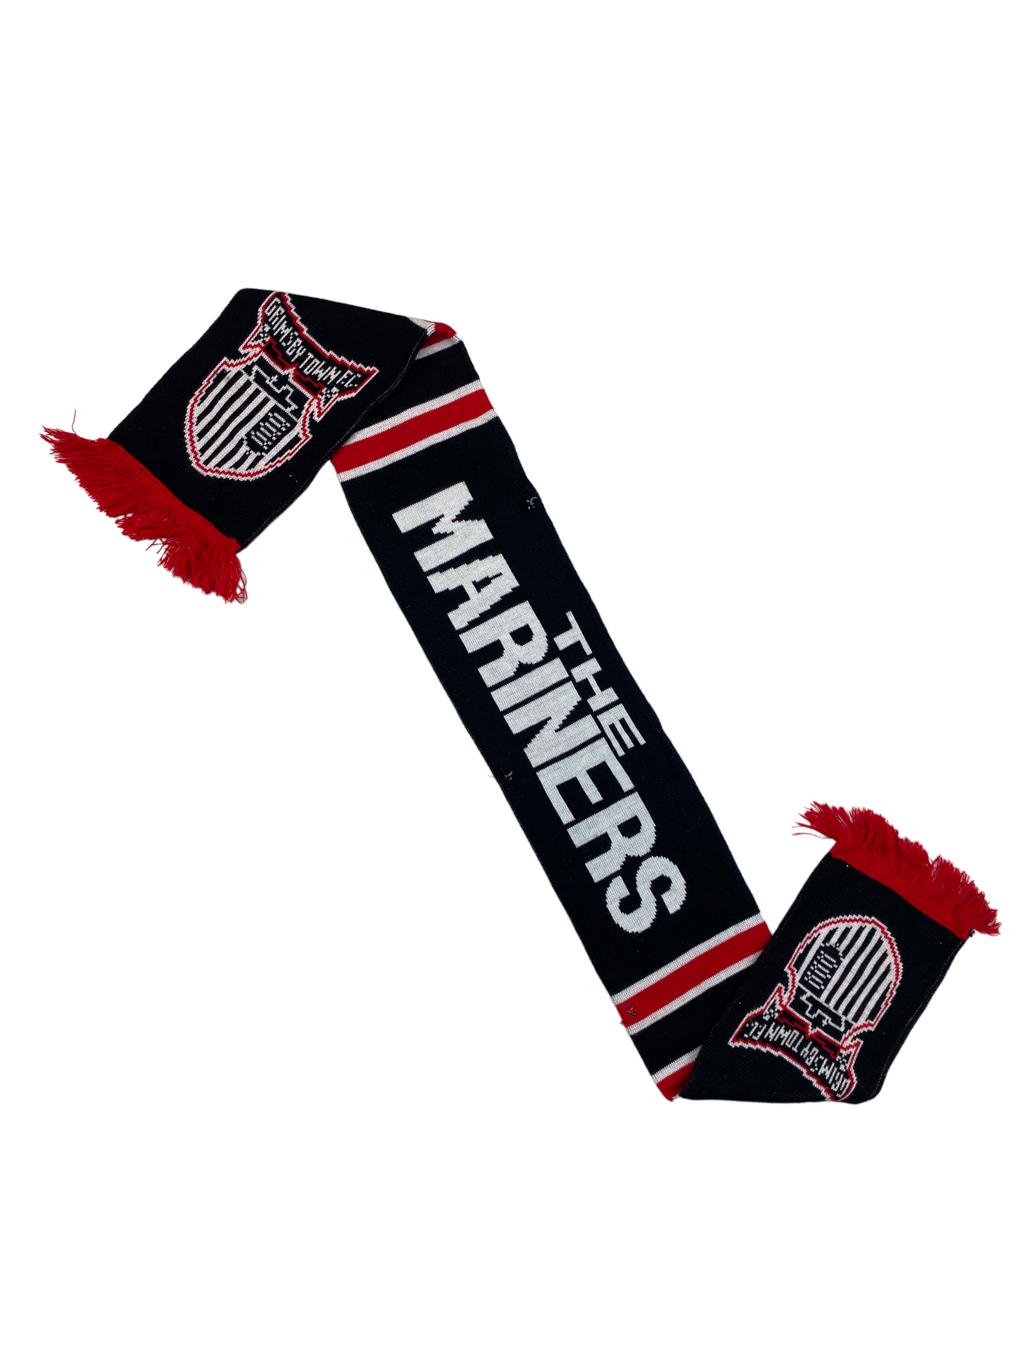 Vintage Grimsby Town Scarf